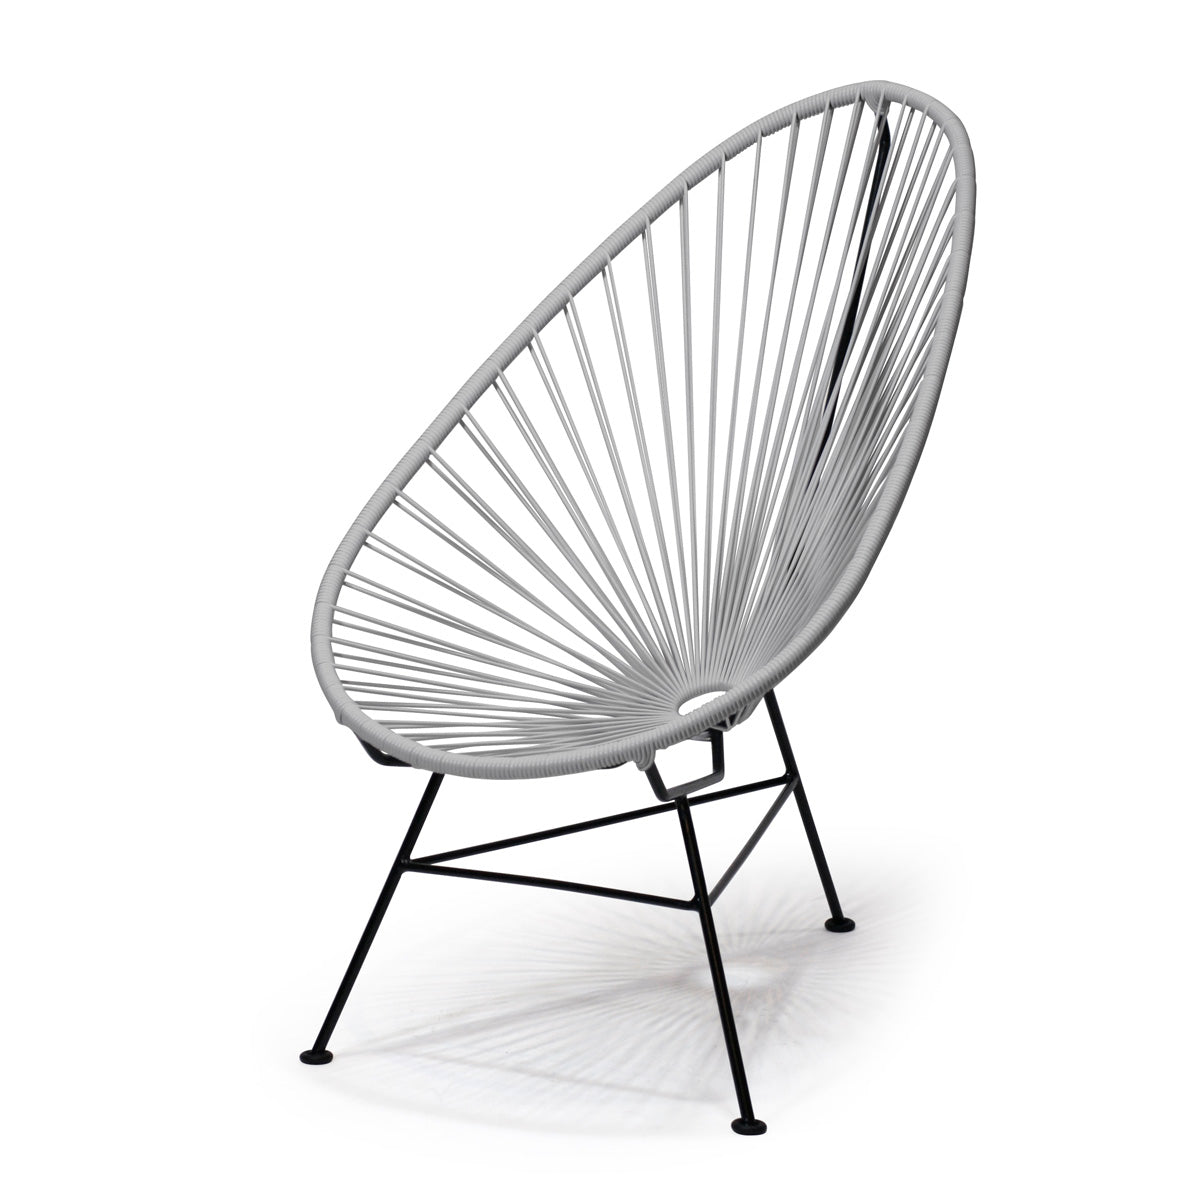 Acapulco Chair Neutral Gray　アカプルコチェア